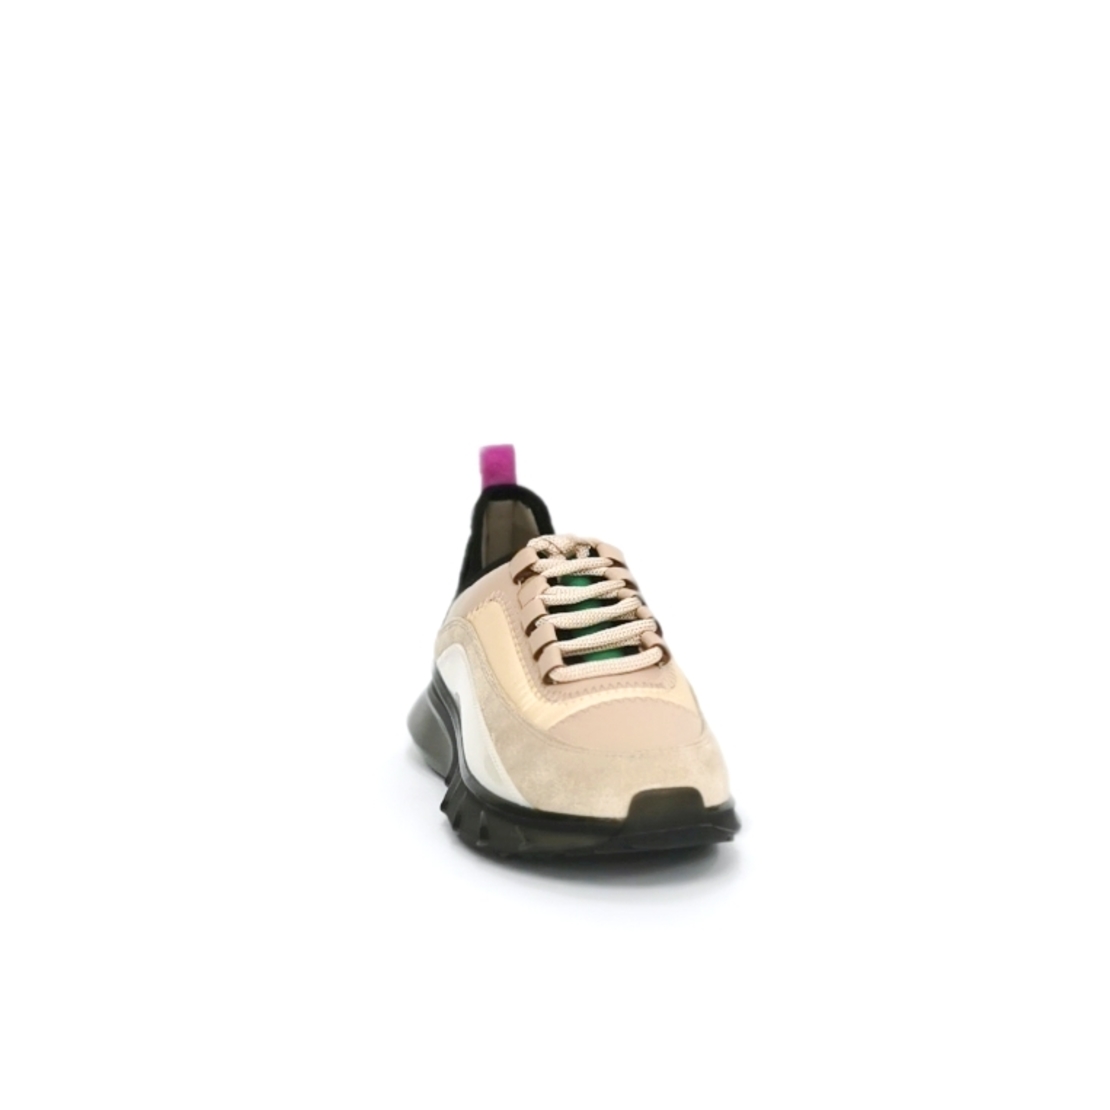 Women's sneakers made of eco leather + textile with anatomical insole in beige /7282